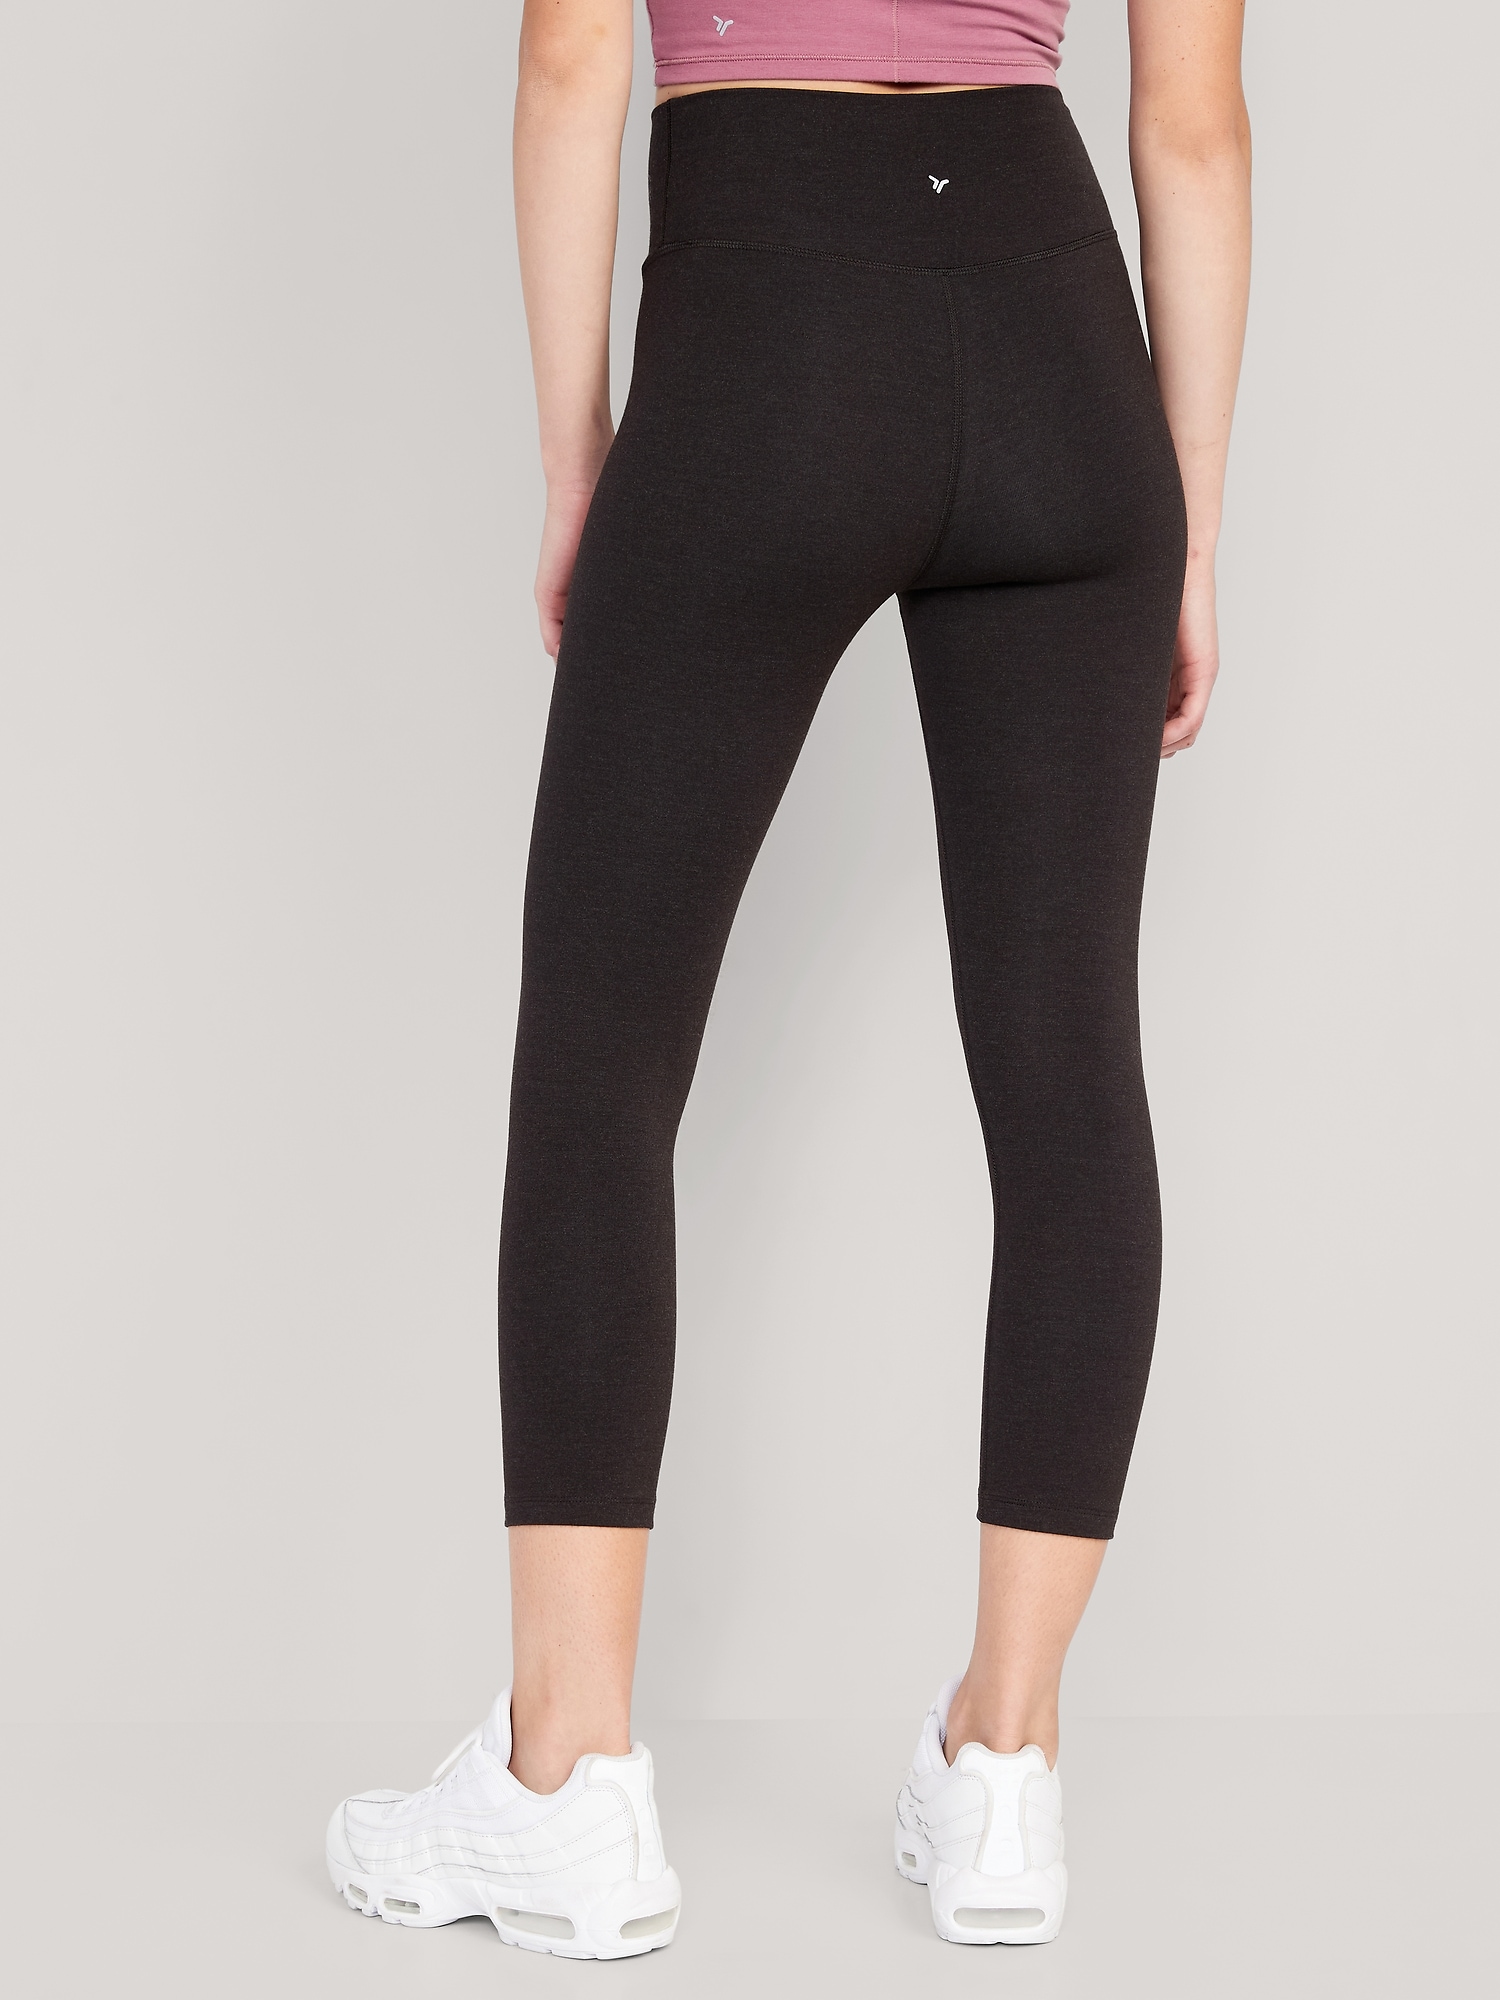 WOMEN'S EXTRA STRETCH HIGH RISE CROPPED LEGGINGS PANTS